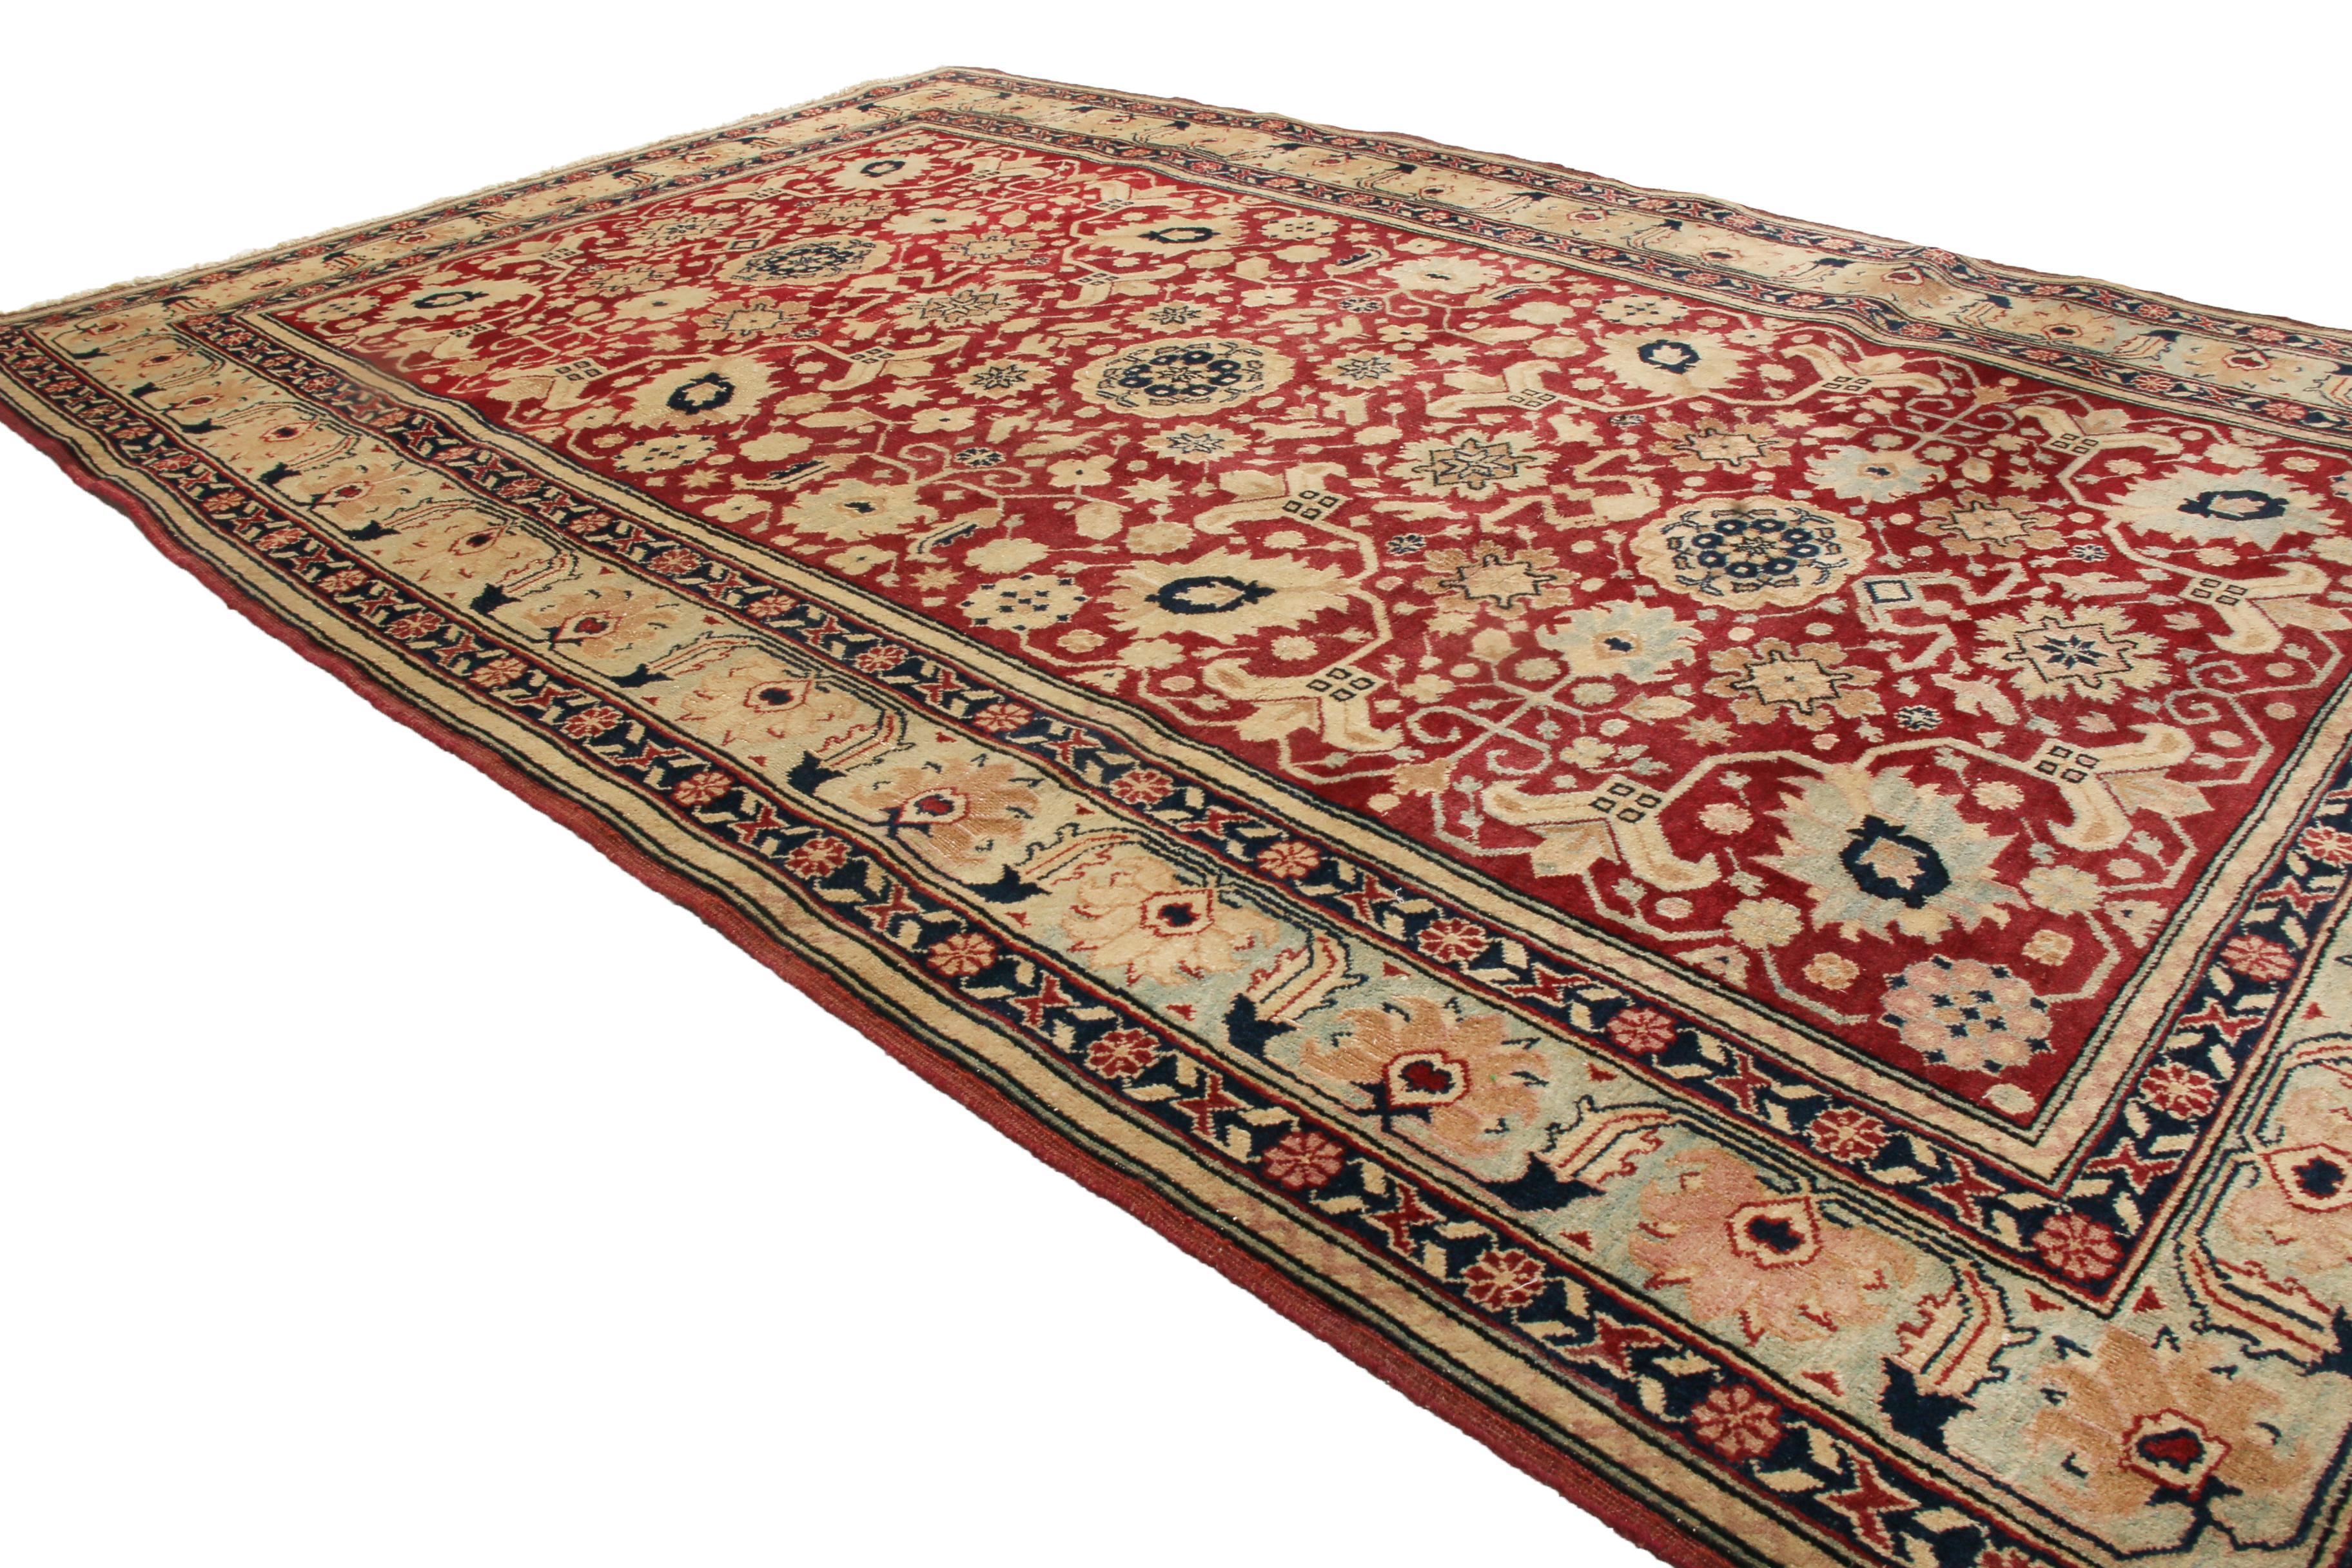 Indian Antique Agra Red Green and Beige-Gold Geometric-Floral Wool Rug by Rug & Kilim For Sale